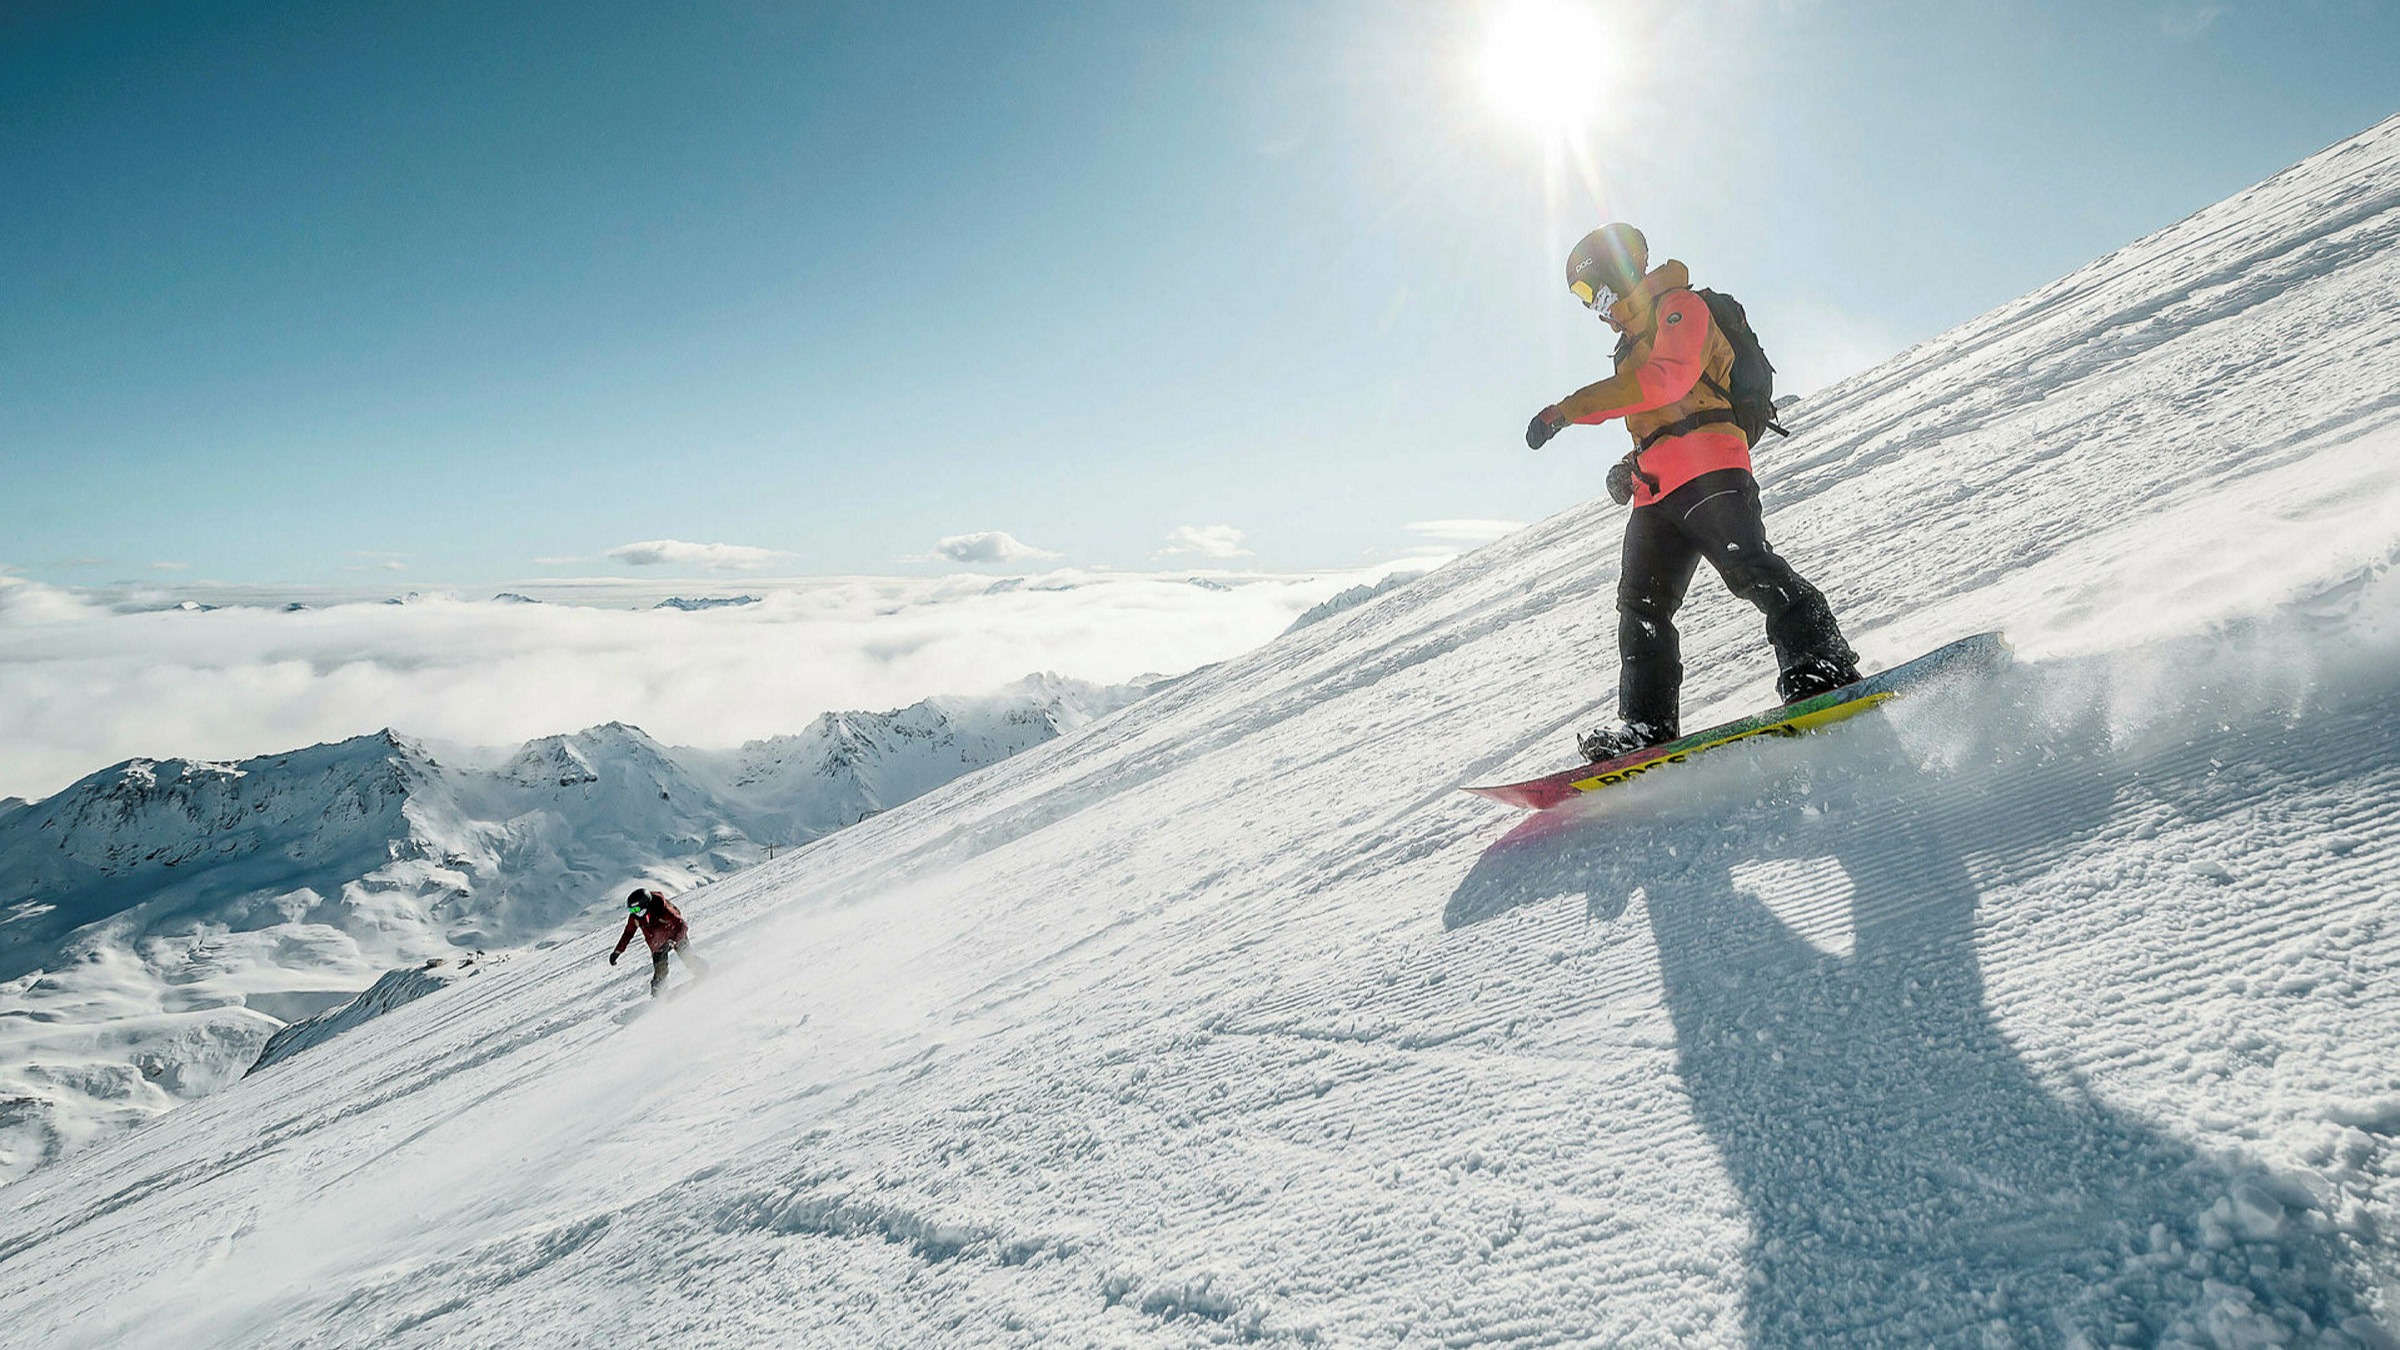 we be able to go skiing this winter? | Financial Times